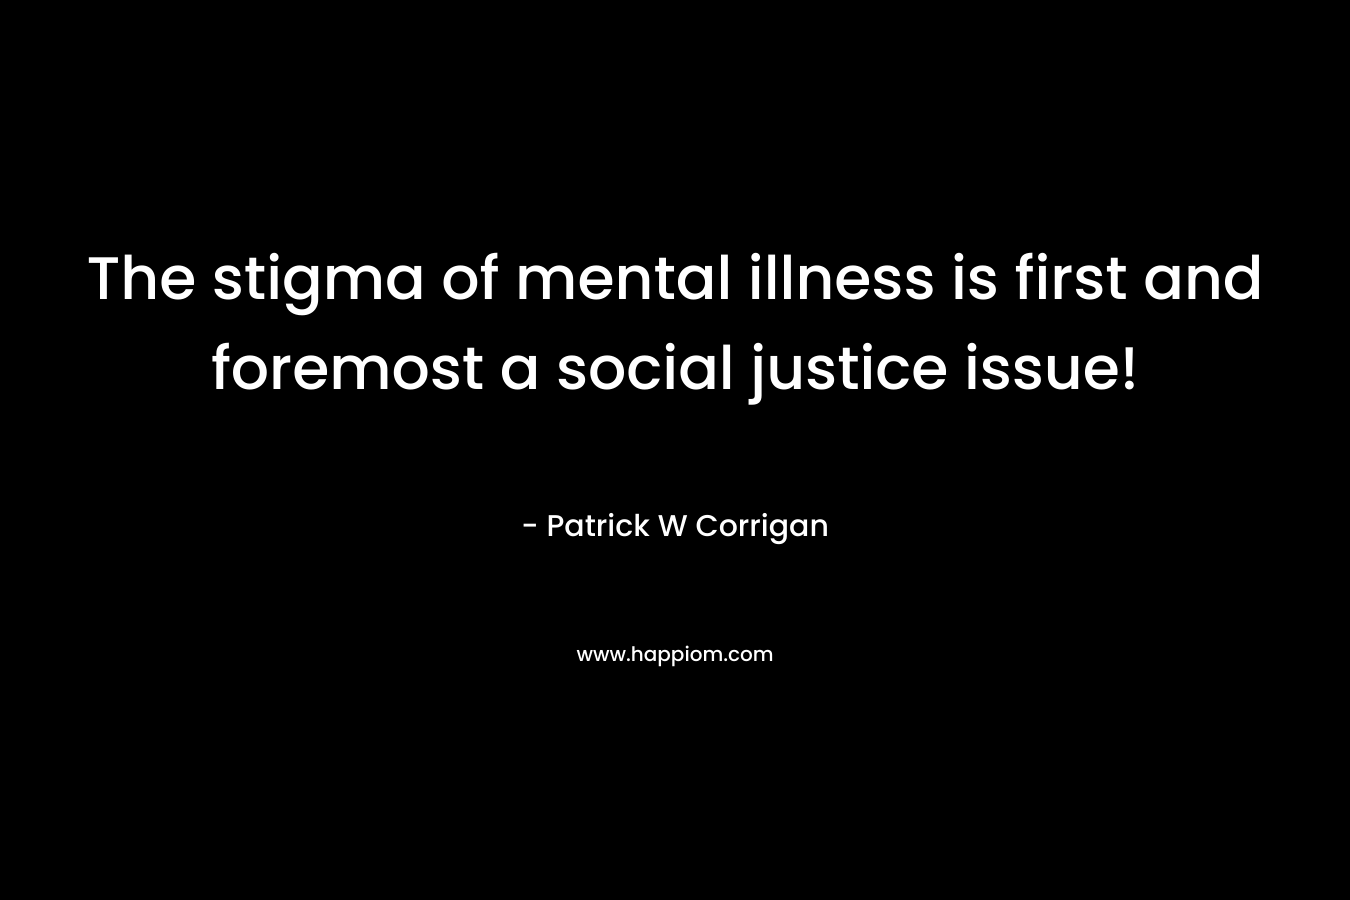 The stigma of mental illness is first and foremost a social justice issue! – Patrick W Corrigan